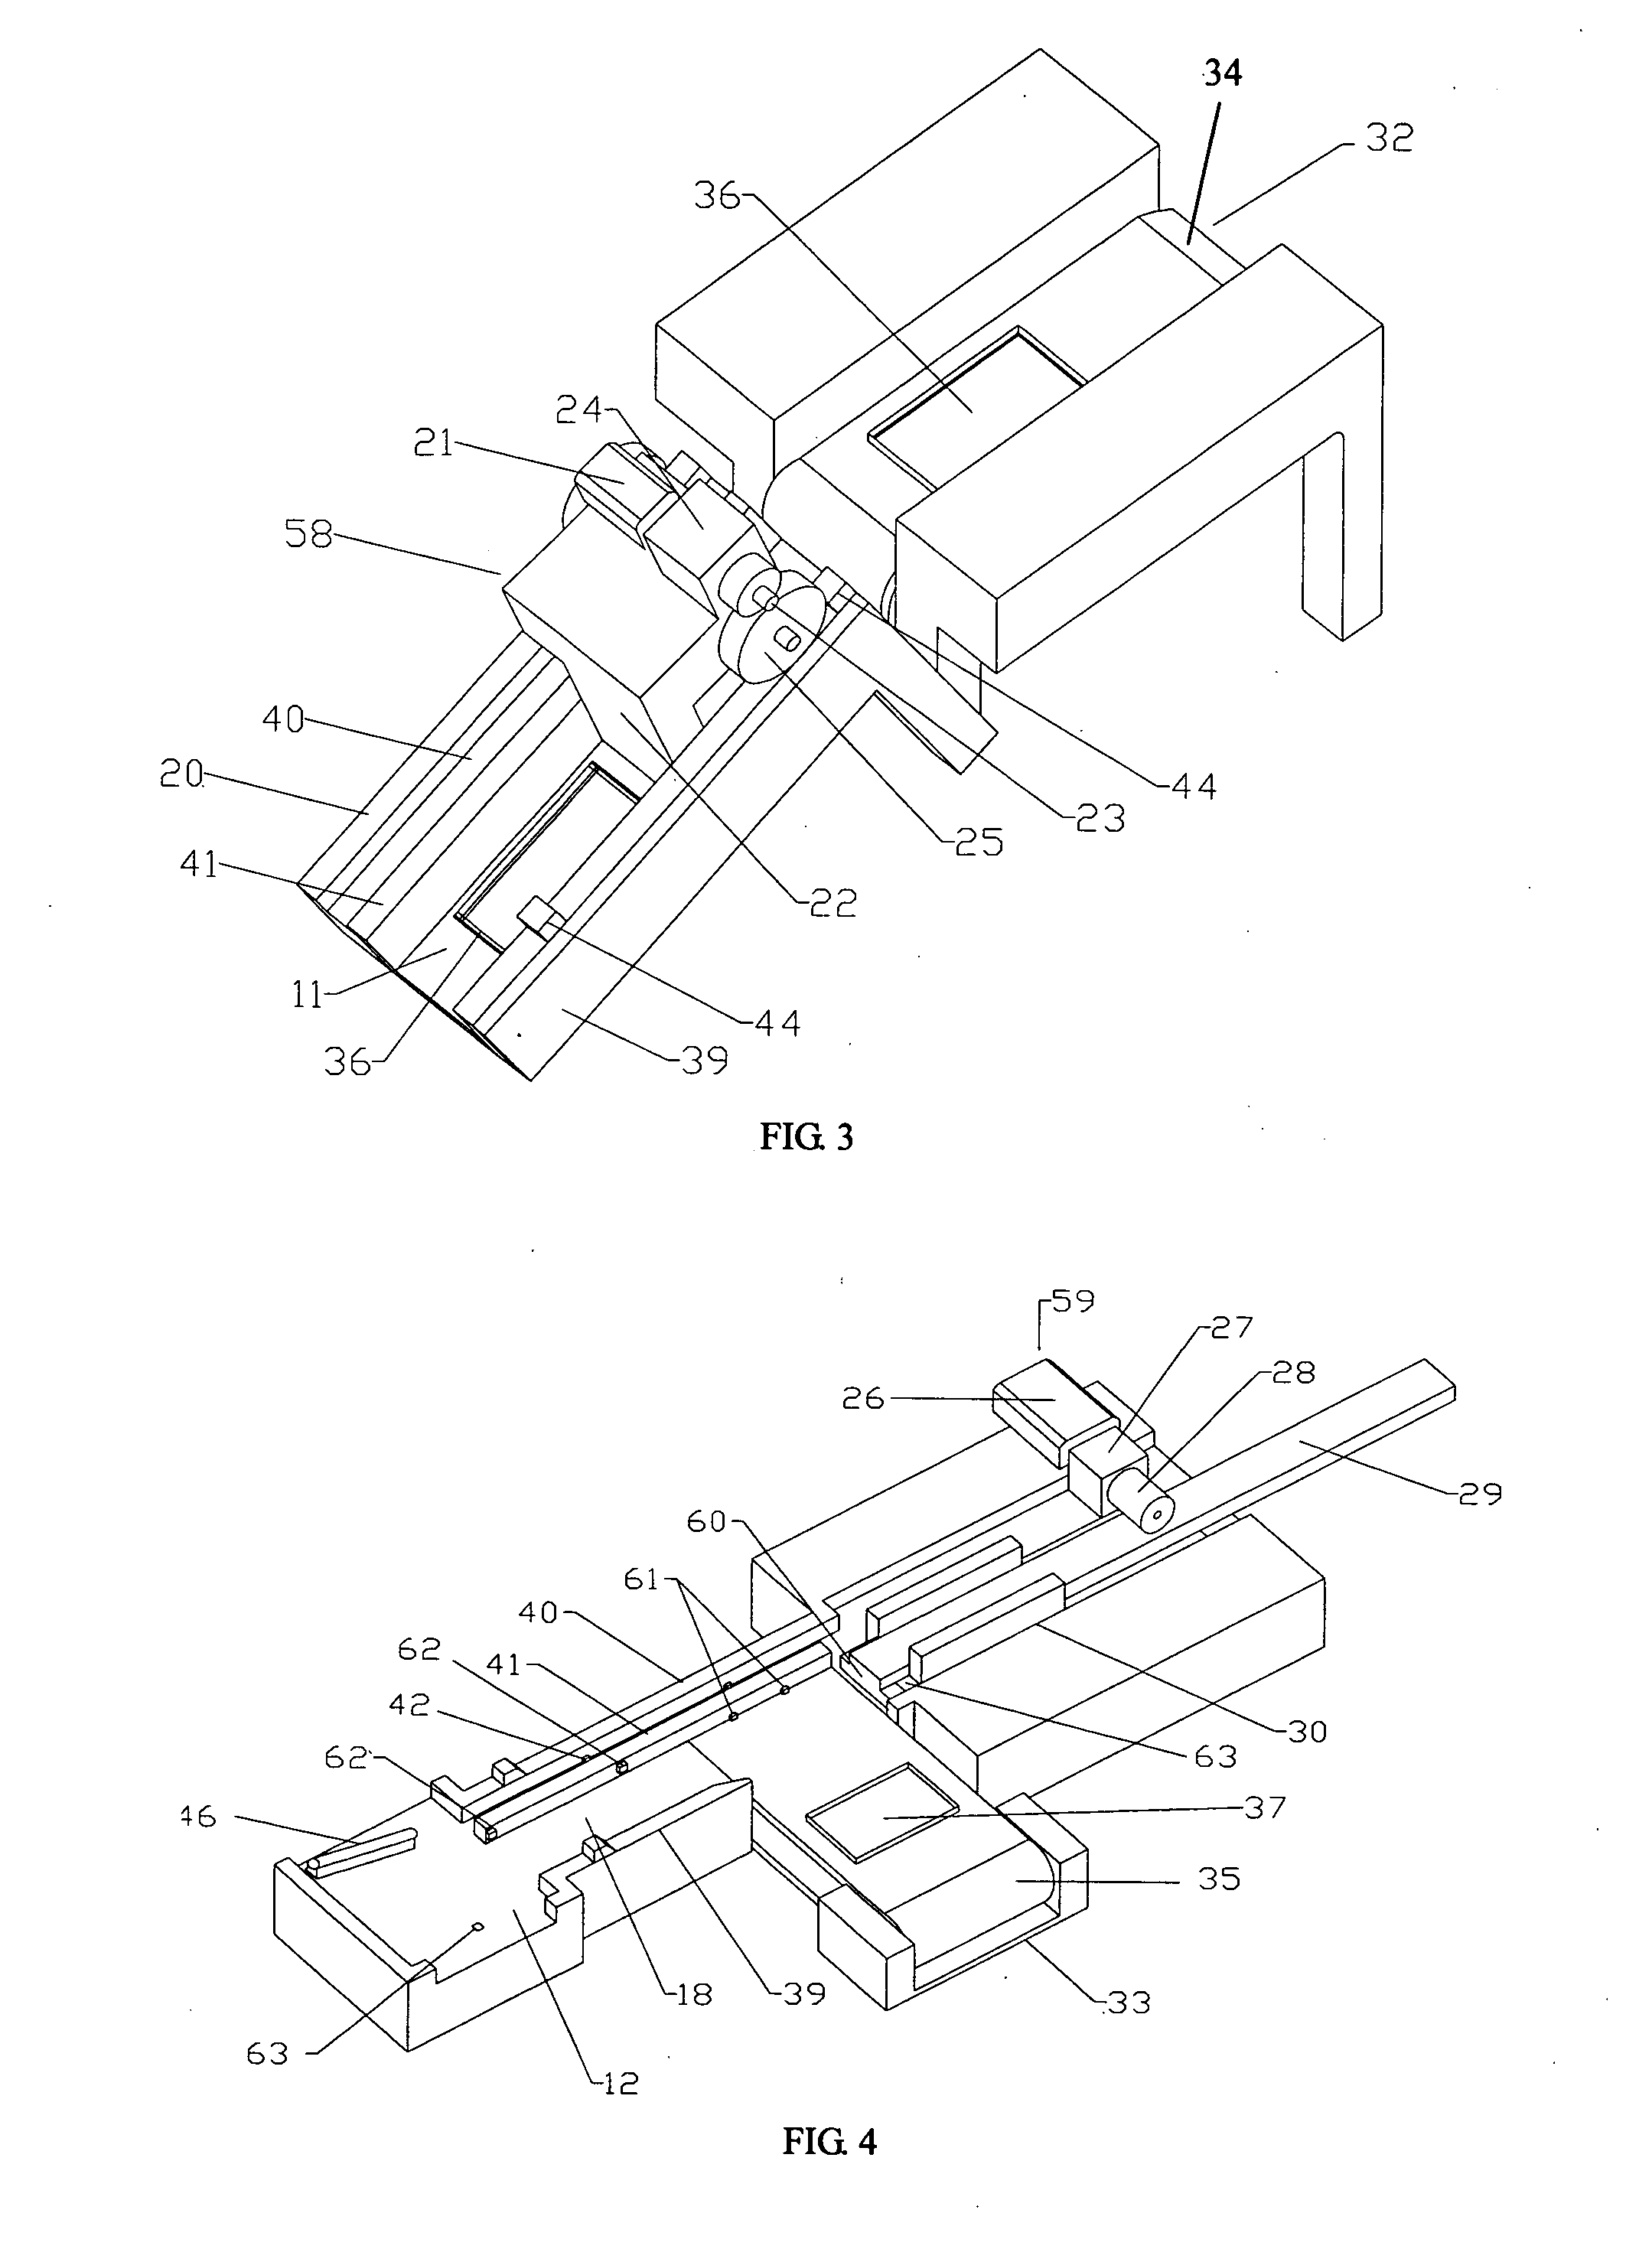 Auto-assembling system for small shell devices